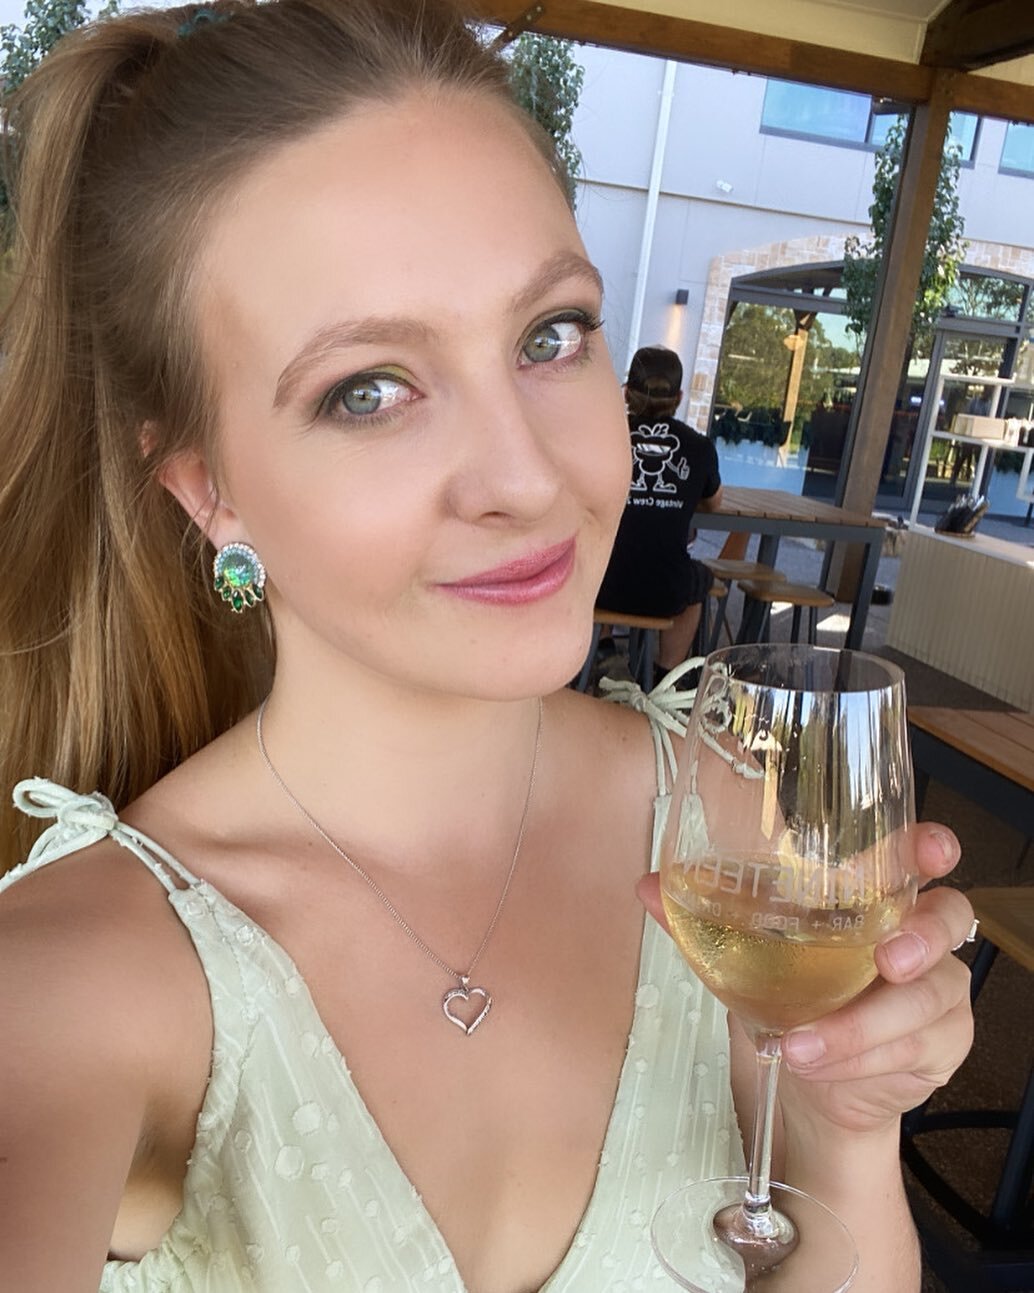 Cheers to Friday!

Gigging tonight from 5pm at @nineteenhuntervalley ❤️ 

#musician #artist #singersongwriter #singing #songwriter #livemusic #gig #huntervalley #wine